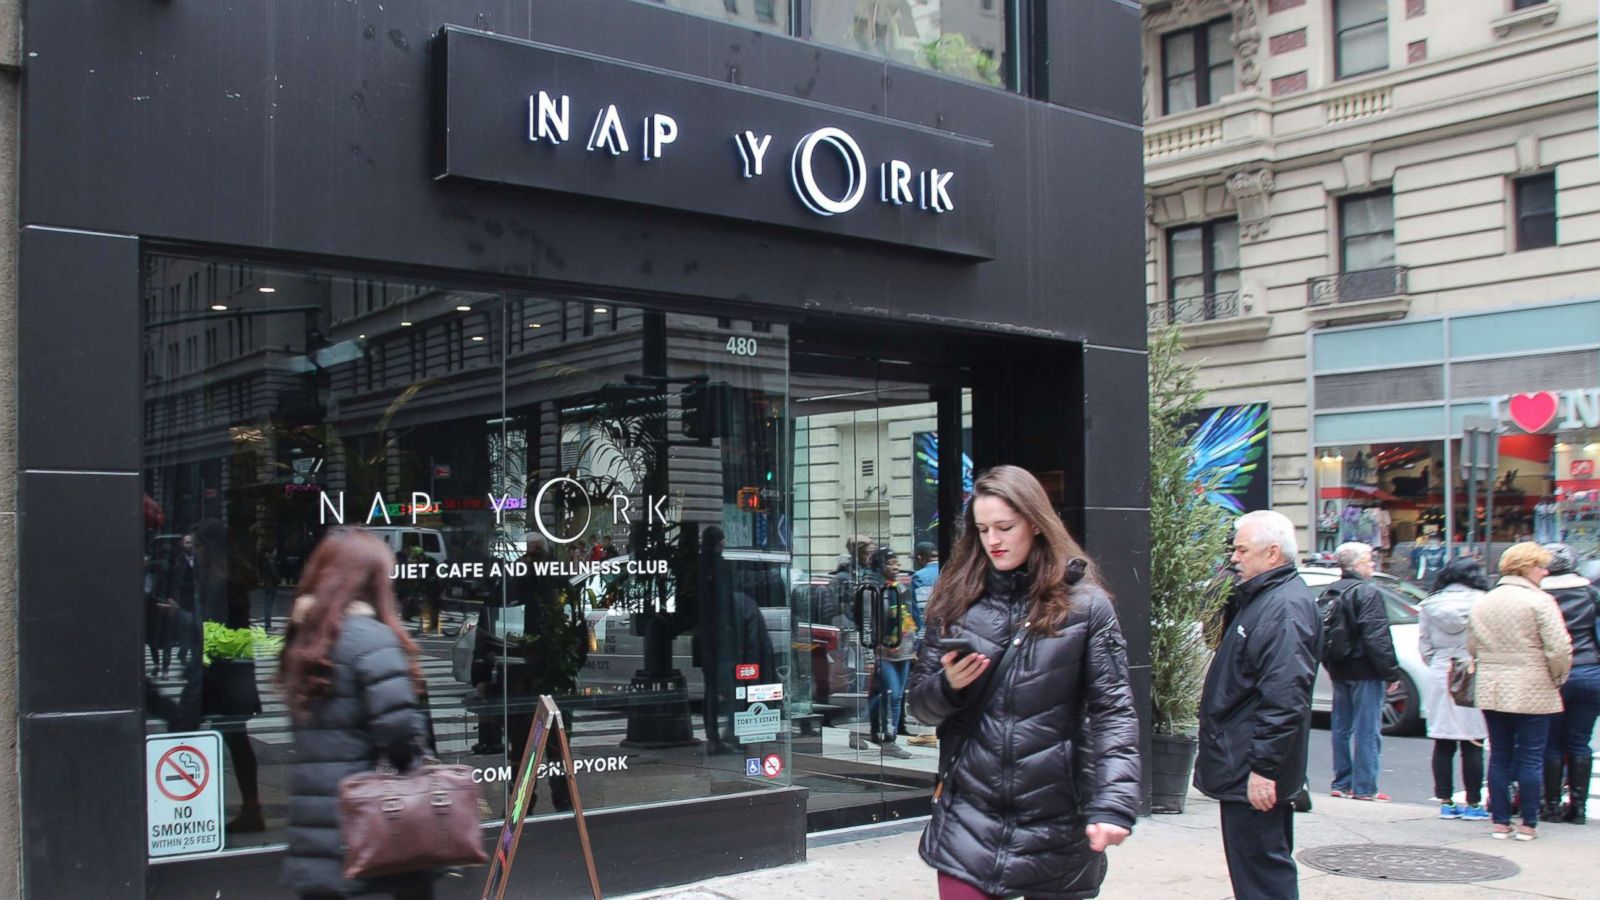 PHOTO: In the sound-proof four story building "Nap York", one can find a cafe and numerous "Sleep Pods" where visitors can take a 30 minute nap for around 8 dollars, March 28, 2018.